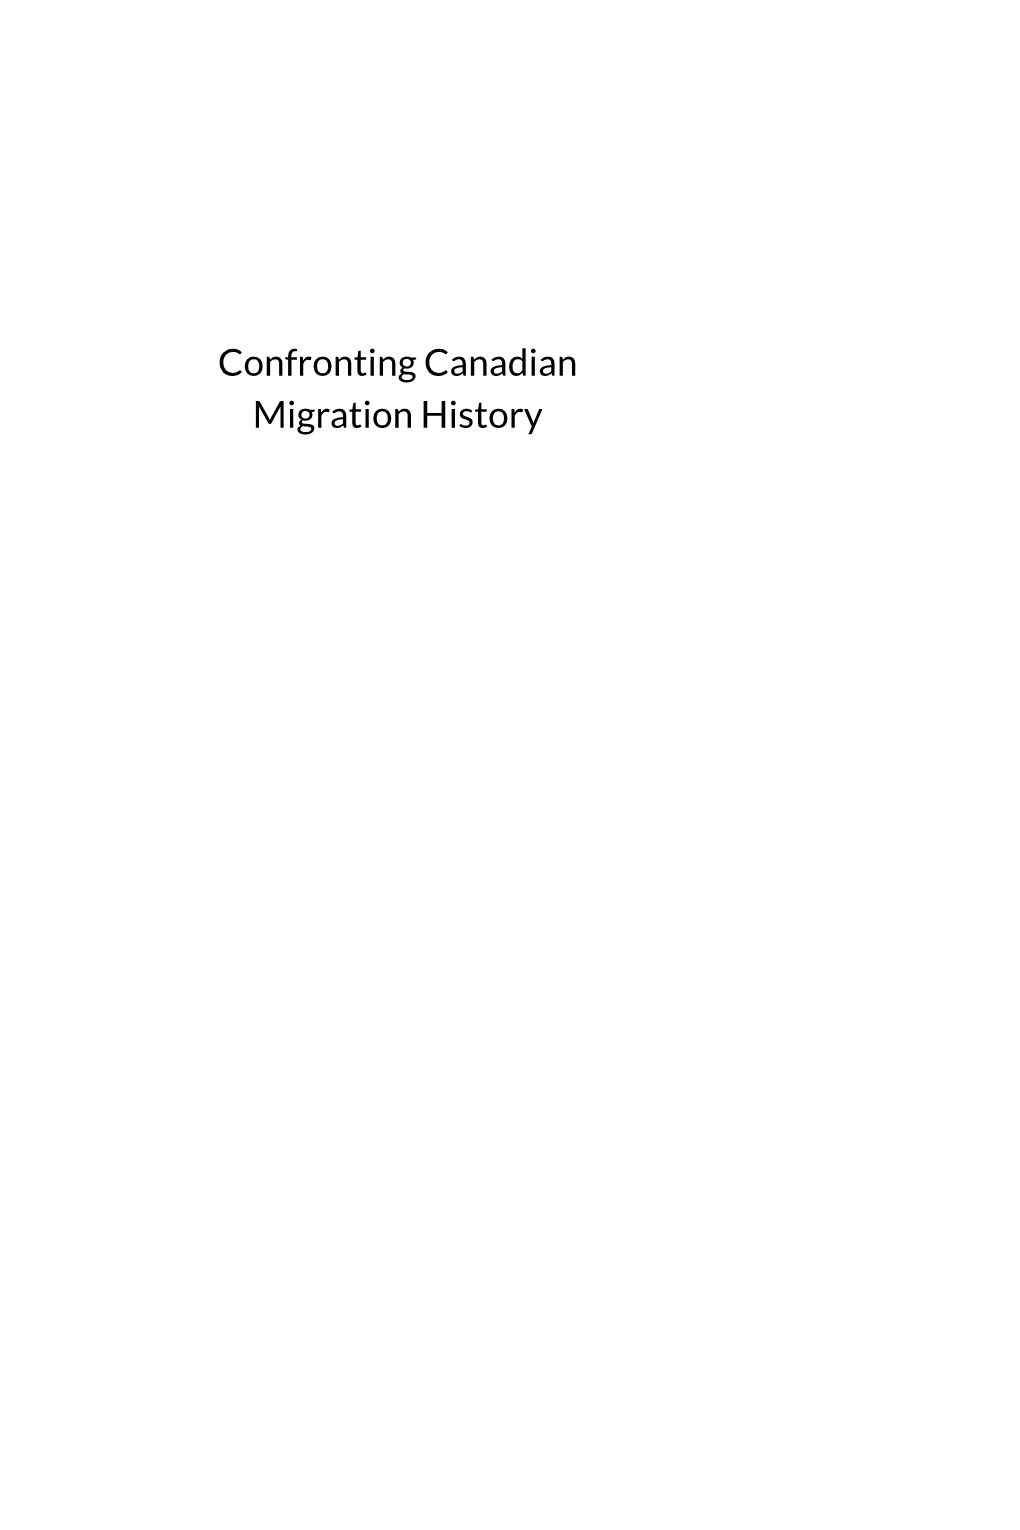 Confronting Canadian Migration History